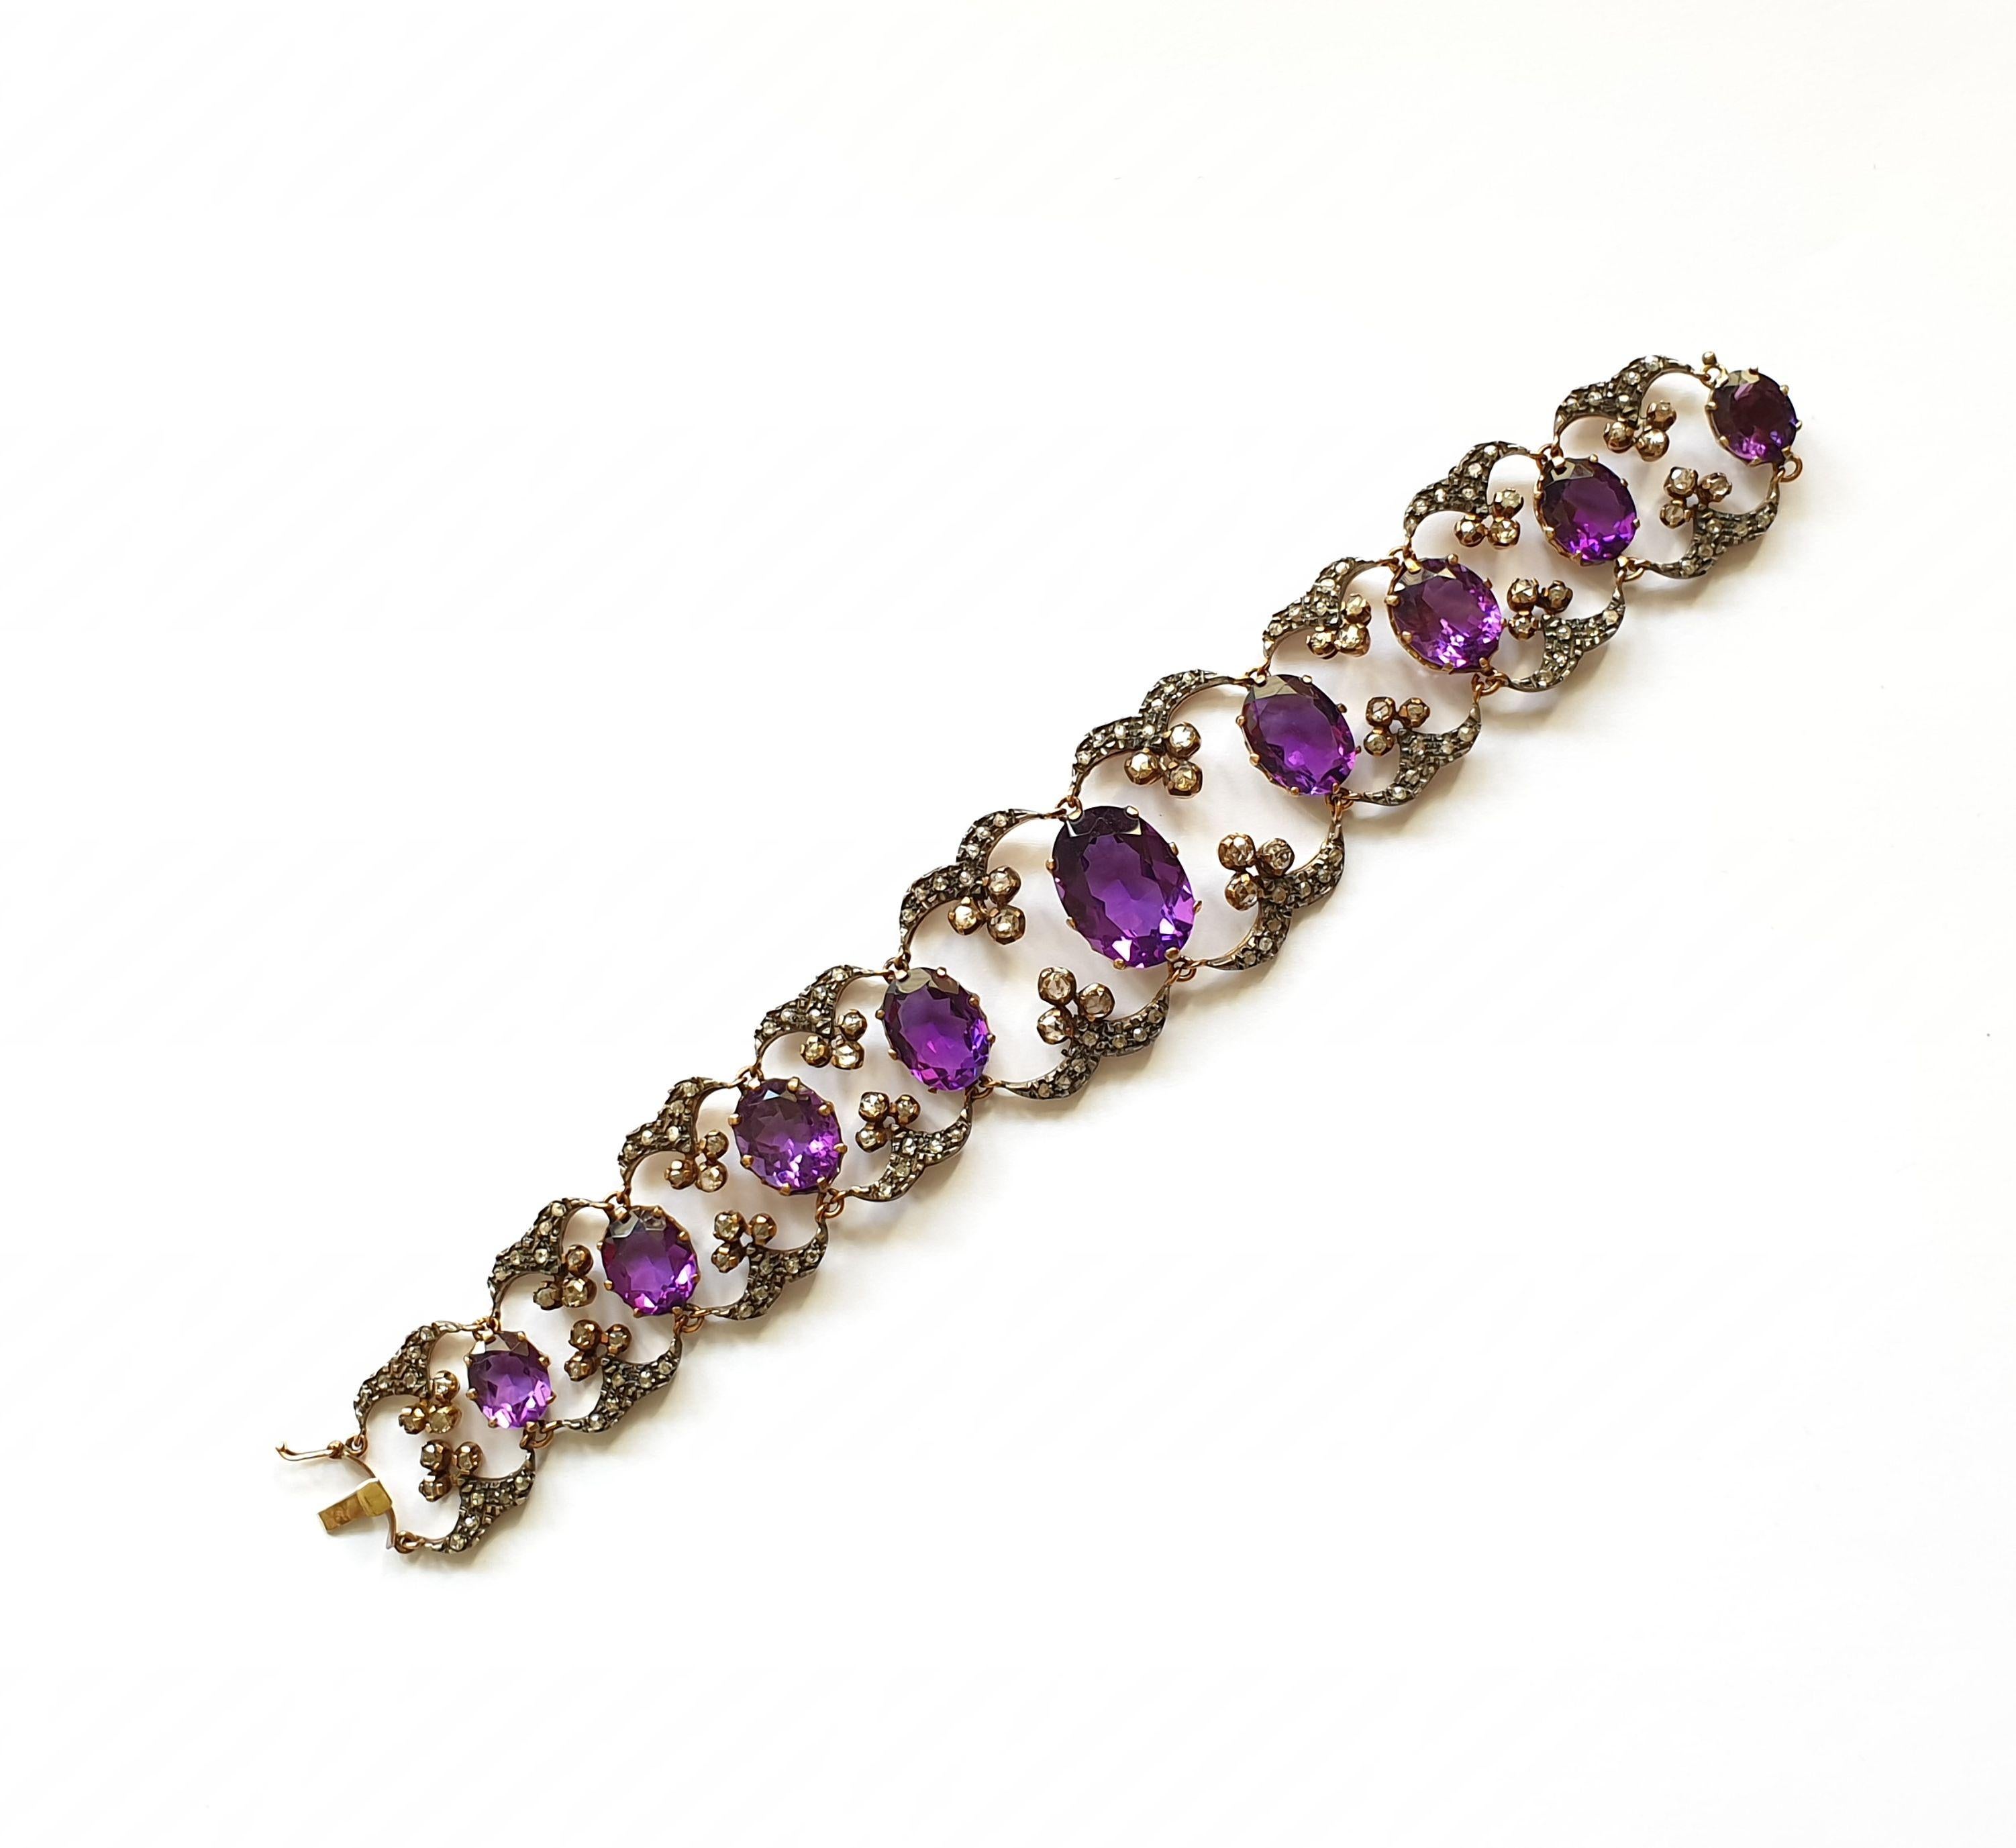 Set with 9 oval shape graduating fine amethysts weighing totally circa 42,5 ct. and filigree flexible arch links, set with 152 rose-cut diamonds weighing total circa 4,20 ct. SI-P, wesselton to top cape. Mounted in silver, 9K and respectively 18K